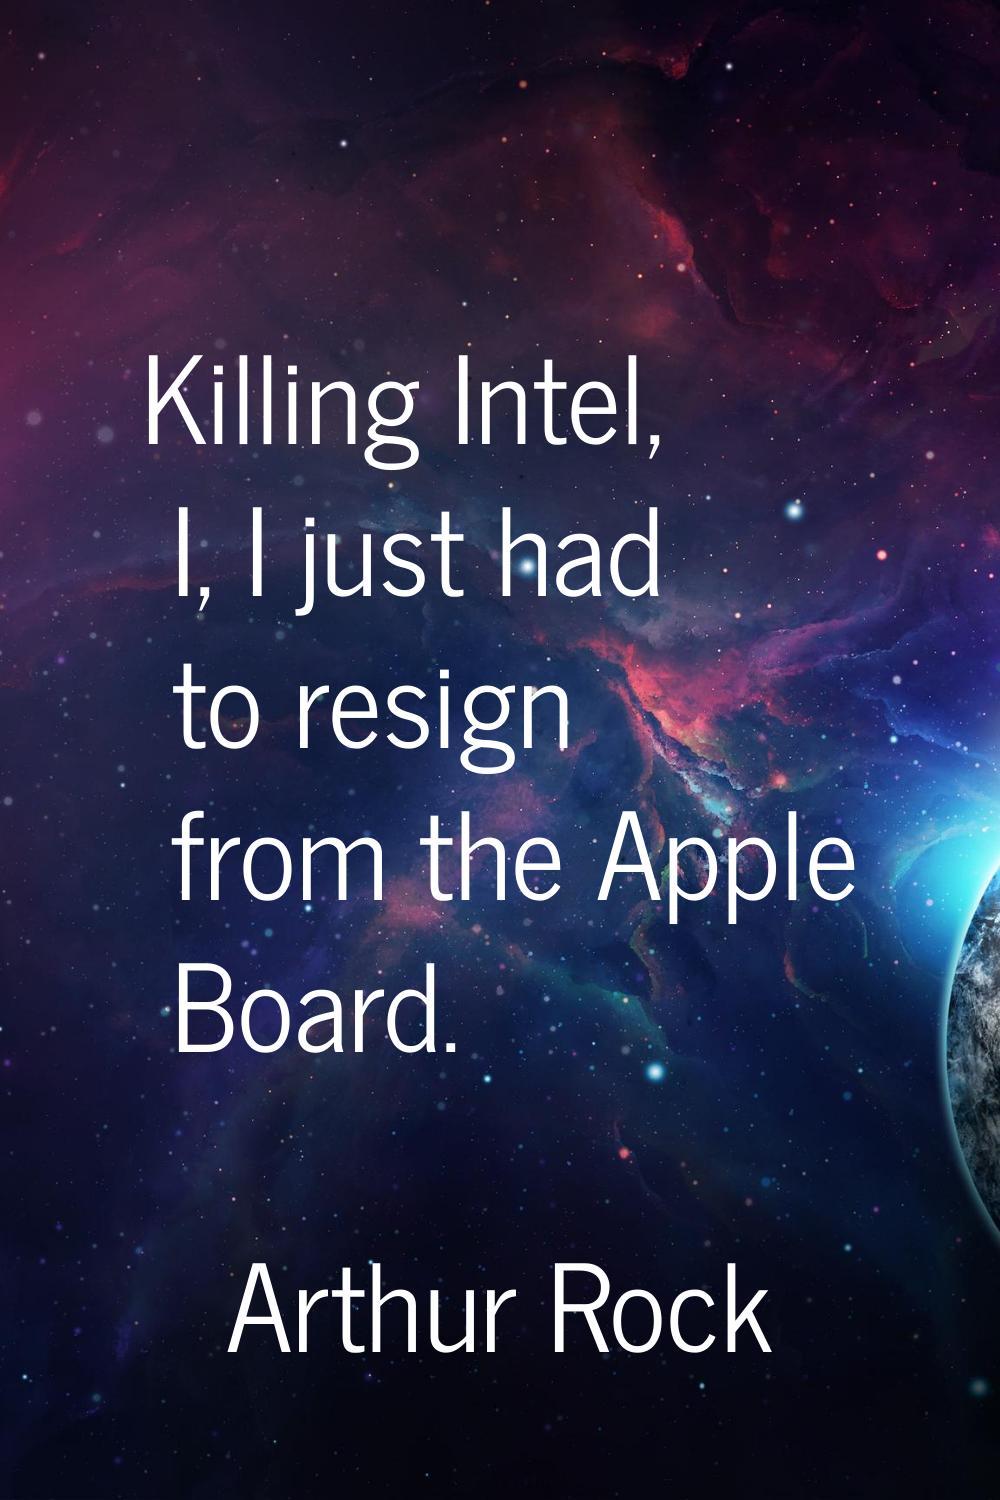 Killing Intel, I, I just had to resign from the Apple Board.